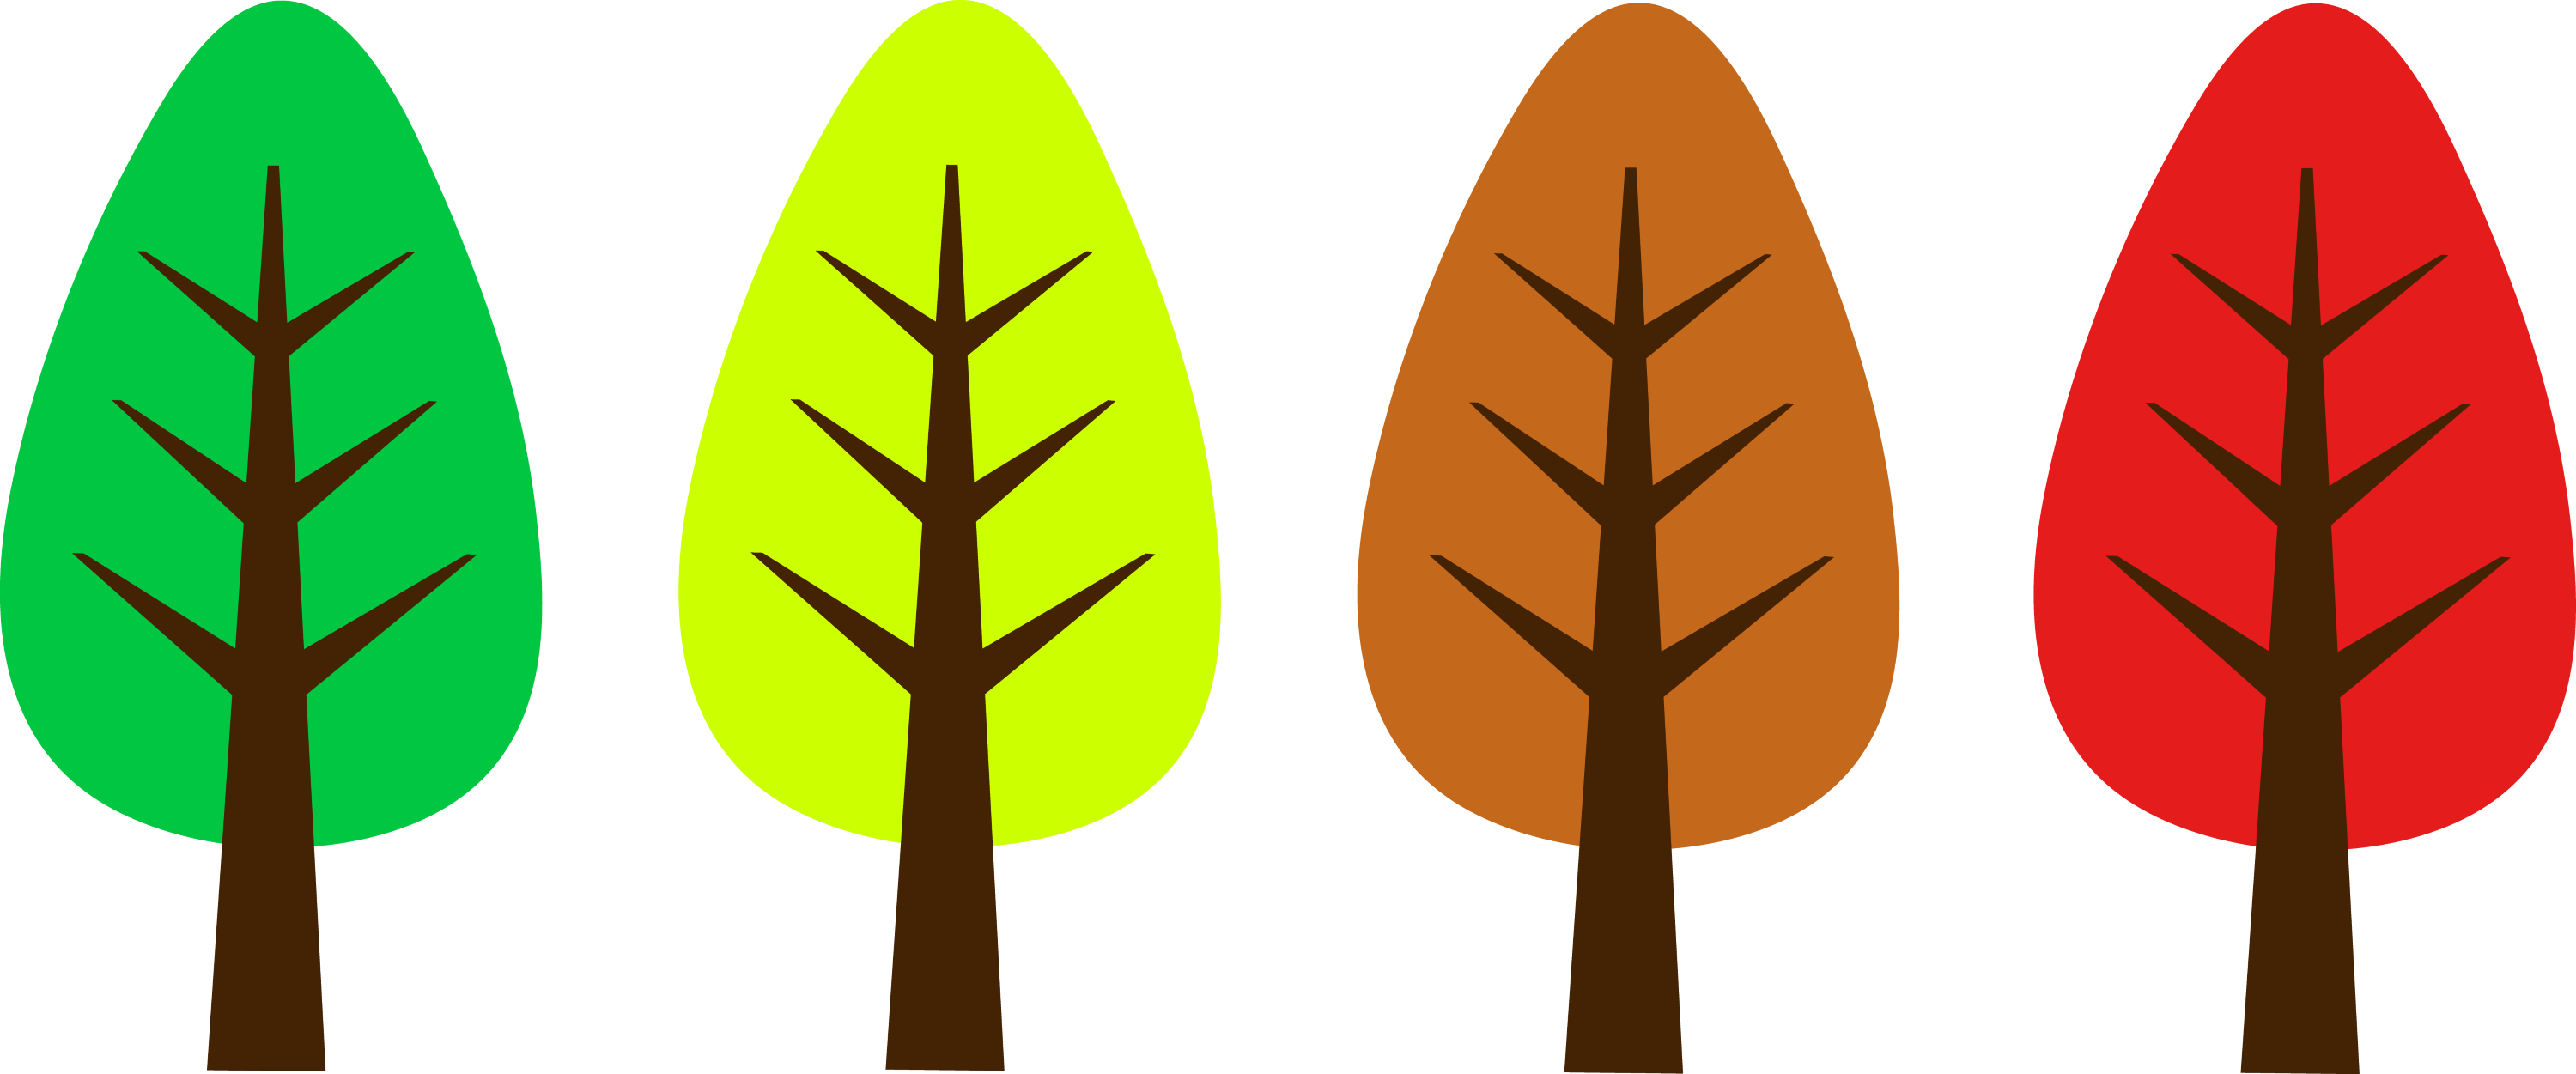 clipart tree leaves - photo #44